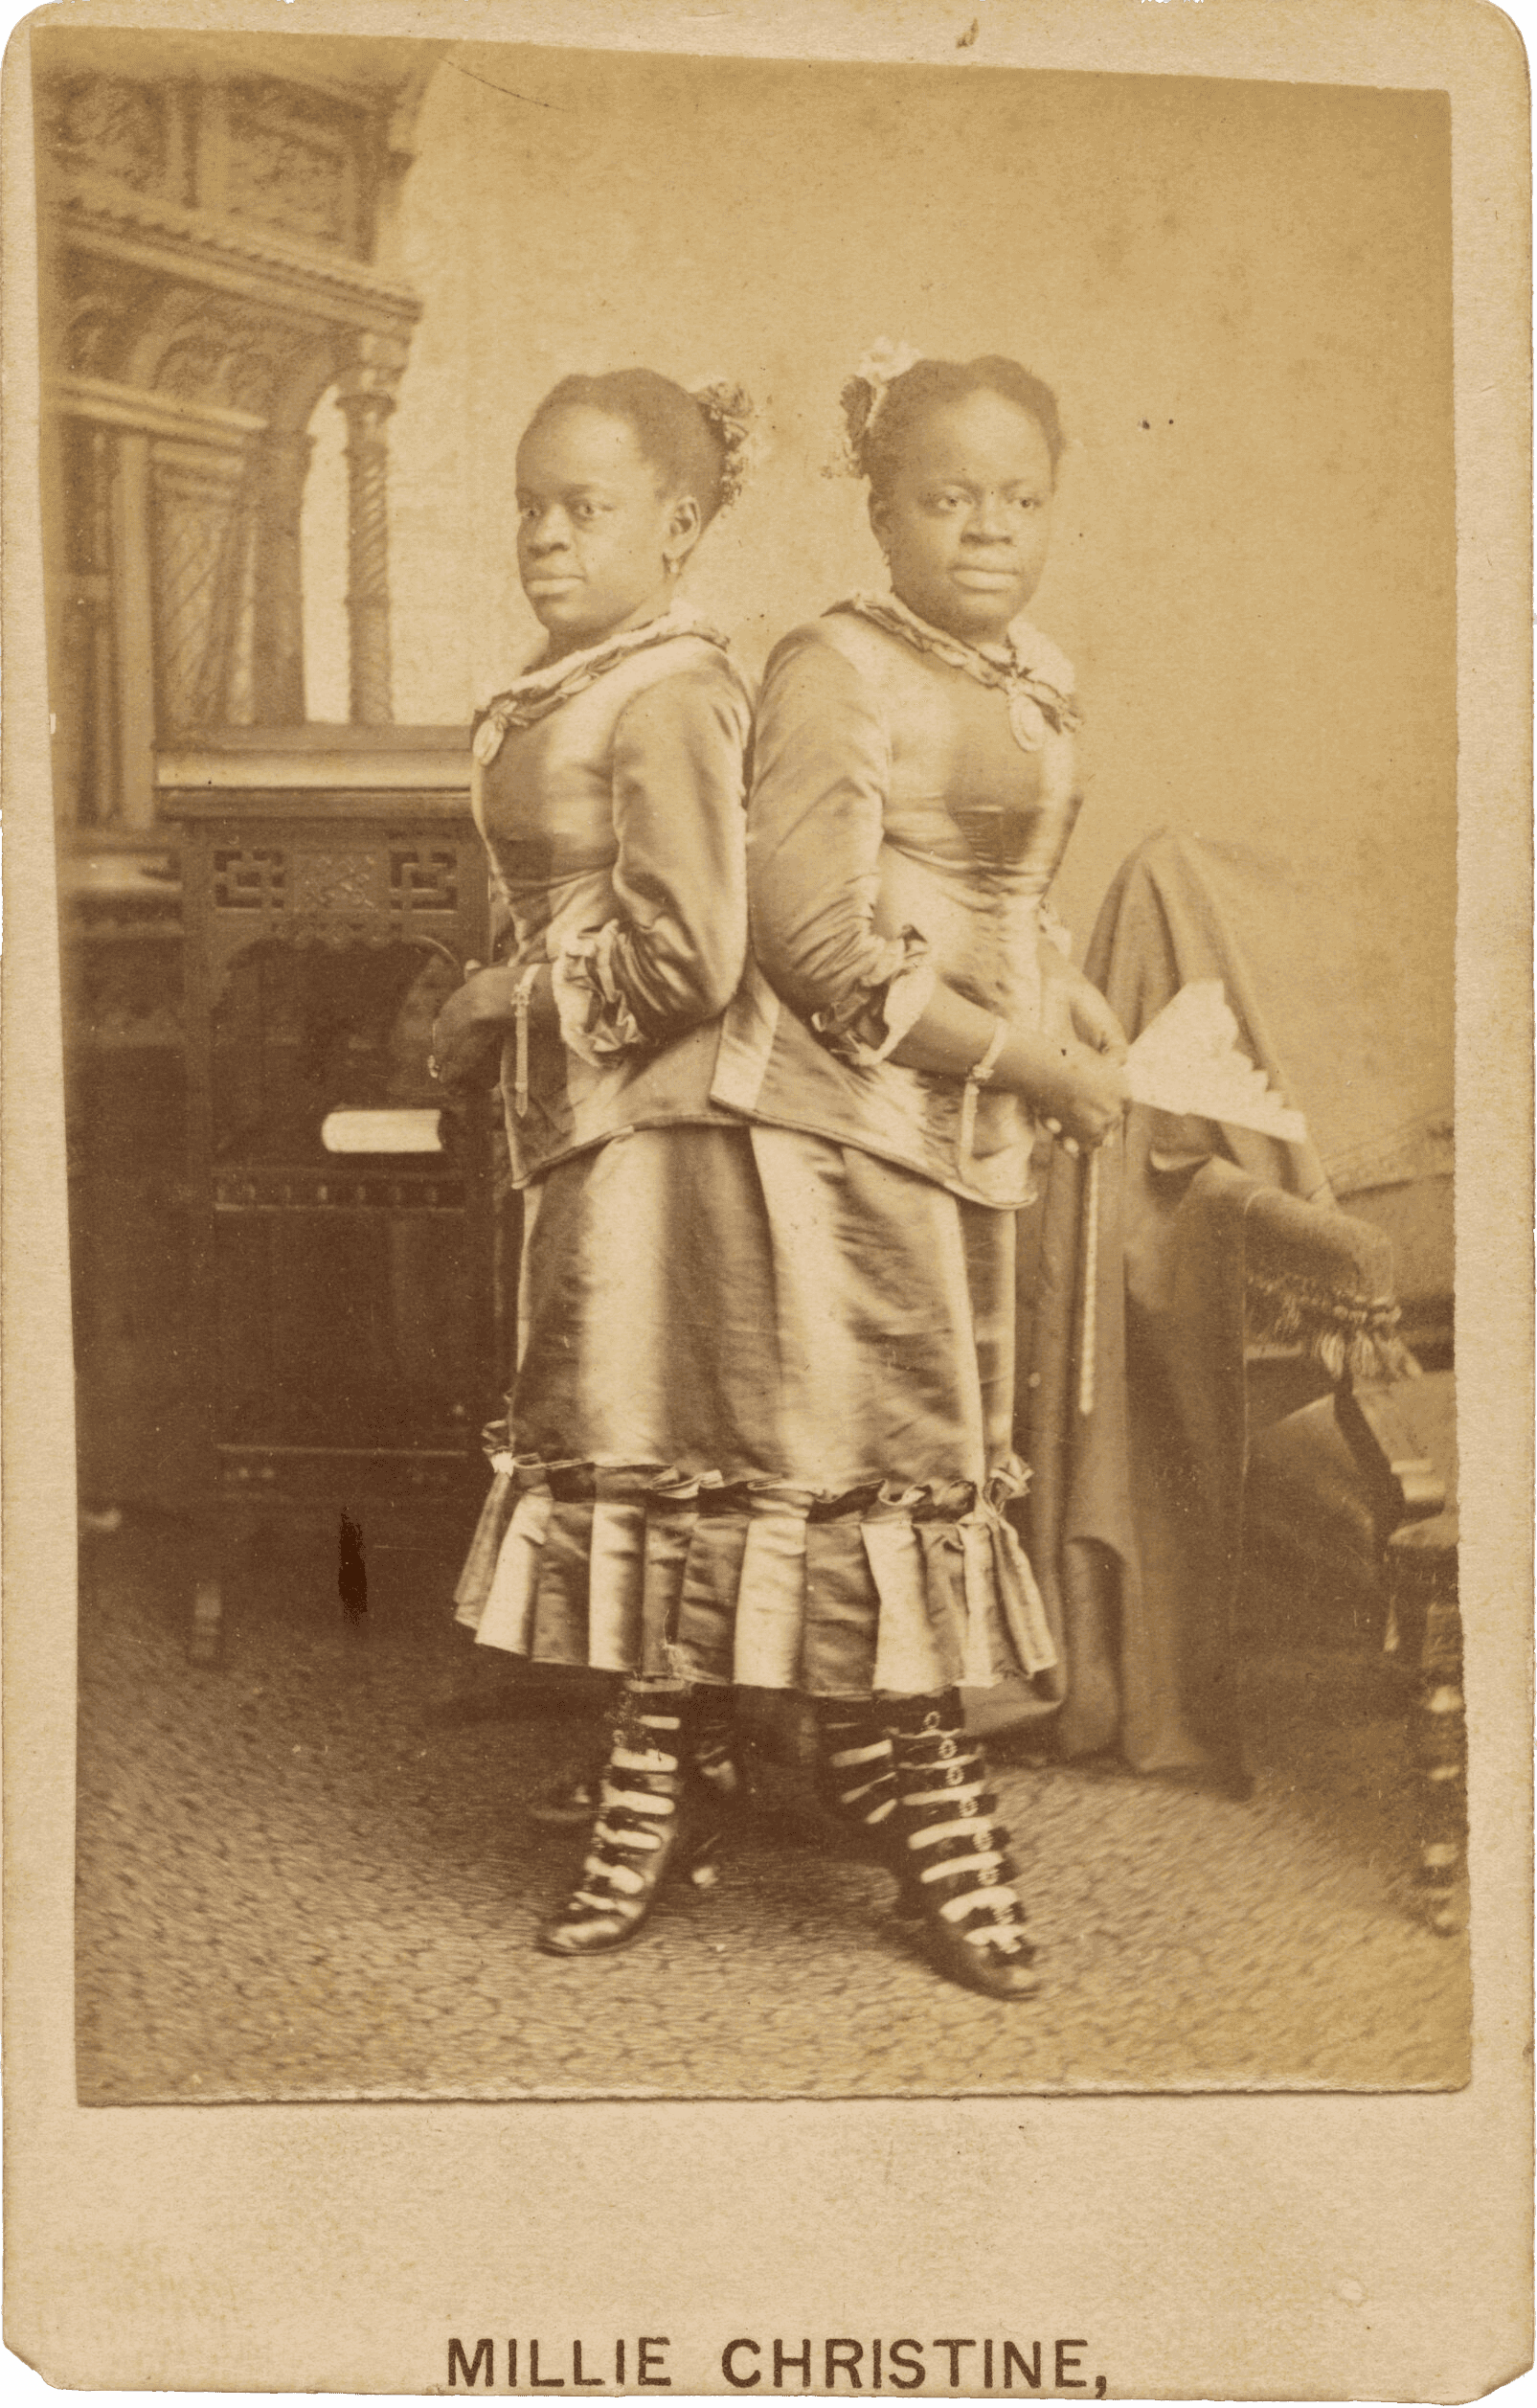 Images of a carte-de-visite photograph of conjoined twins Millie and Christine McCoy.